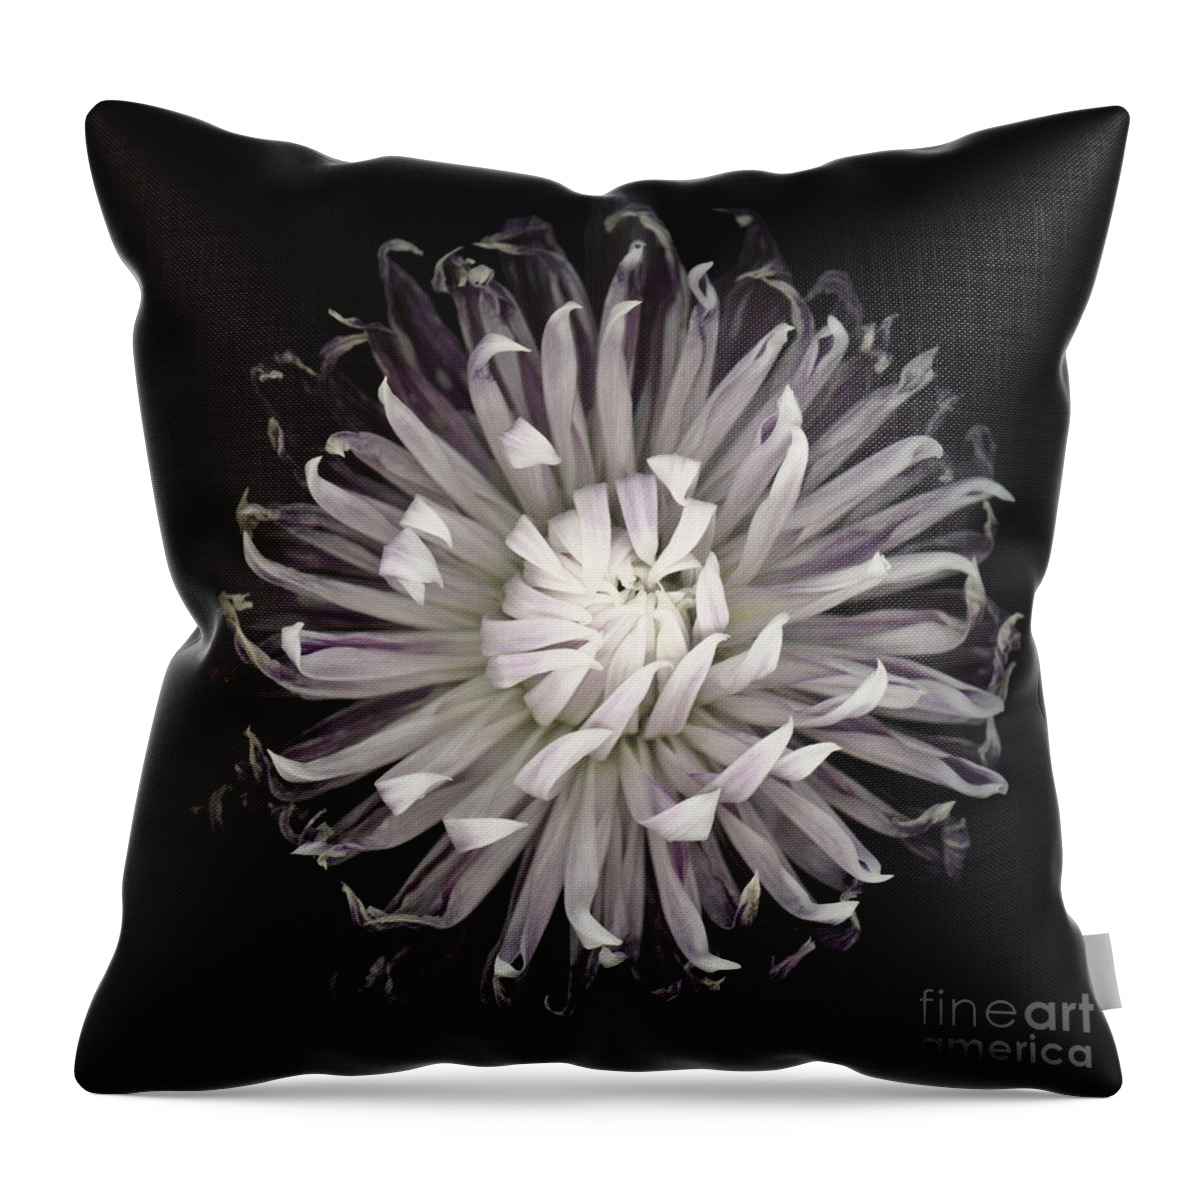 Beauty In Nature Throw Pillow featuring the photograph Muted Dahlia by Oscar Gutierrez